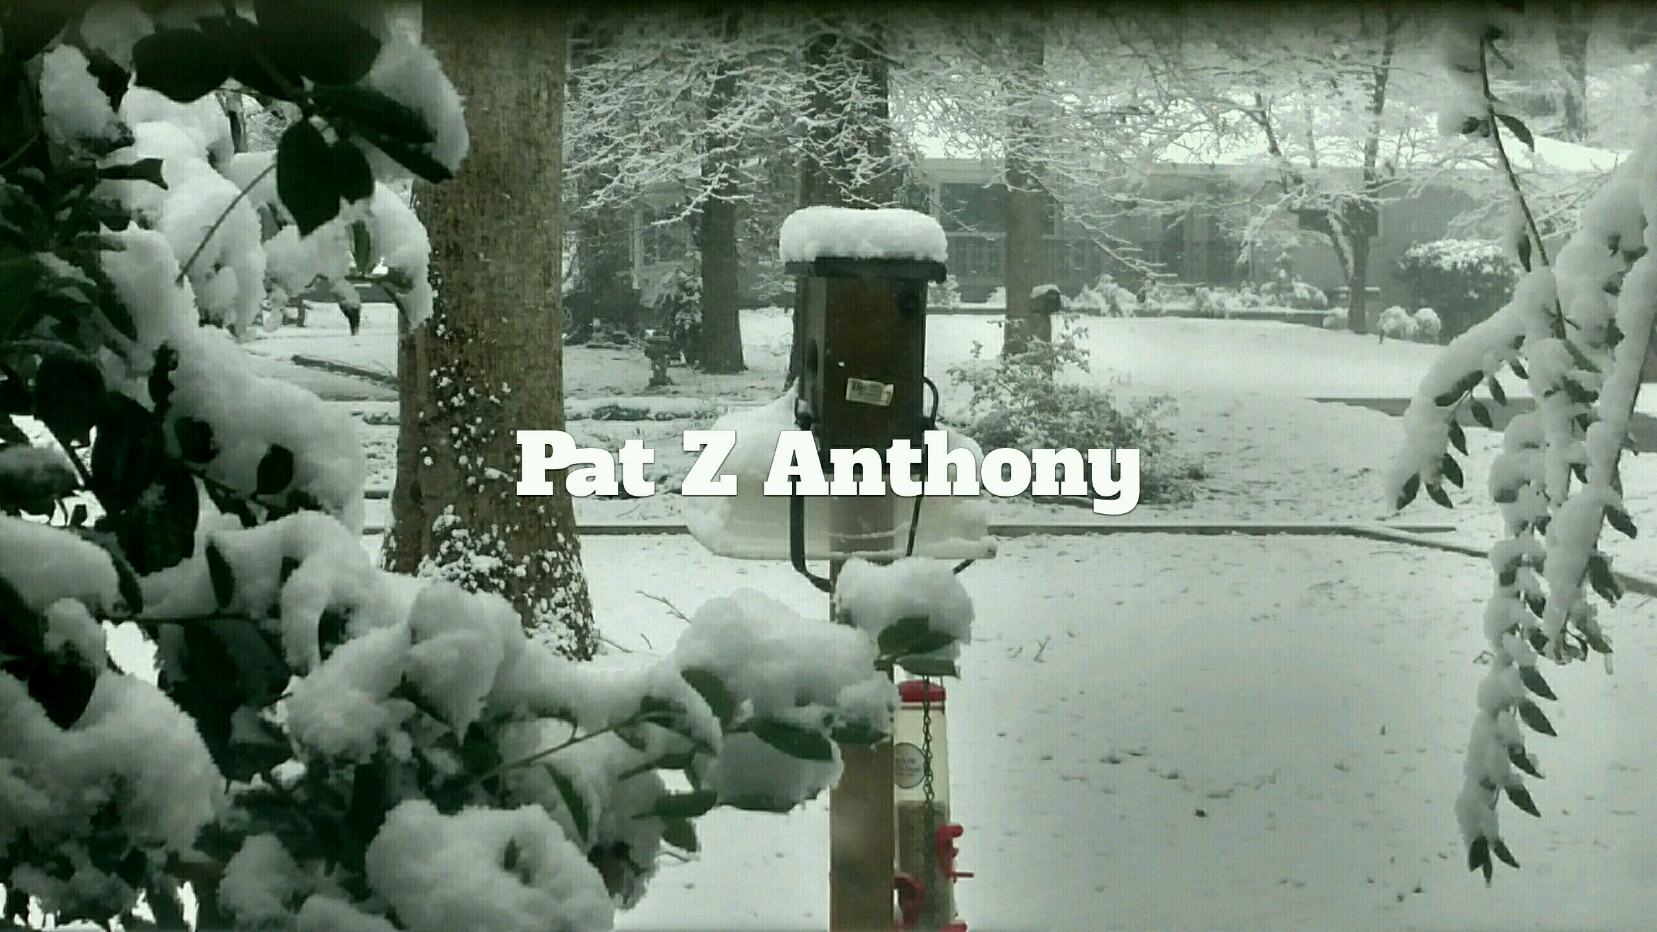 Bird houses in the snow by Pat Z Anthony